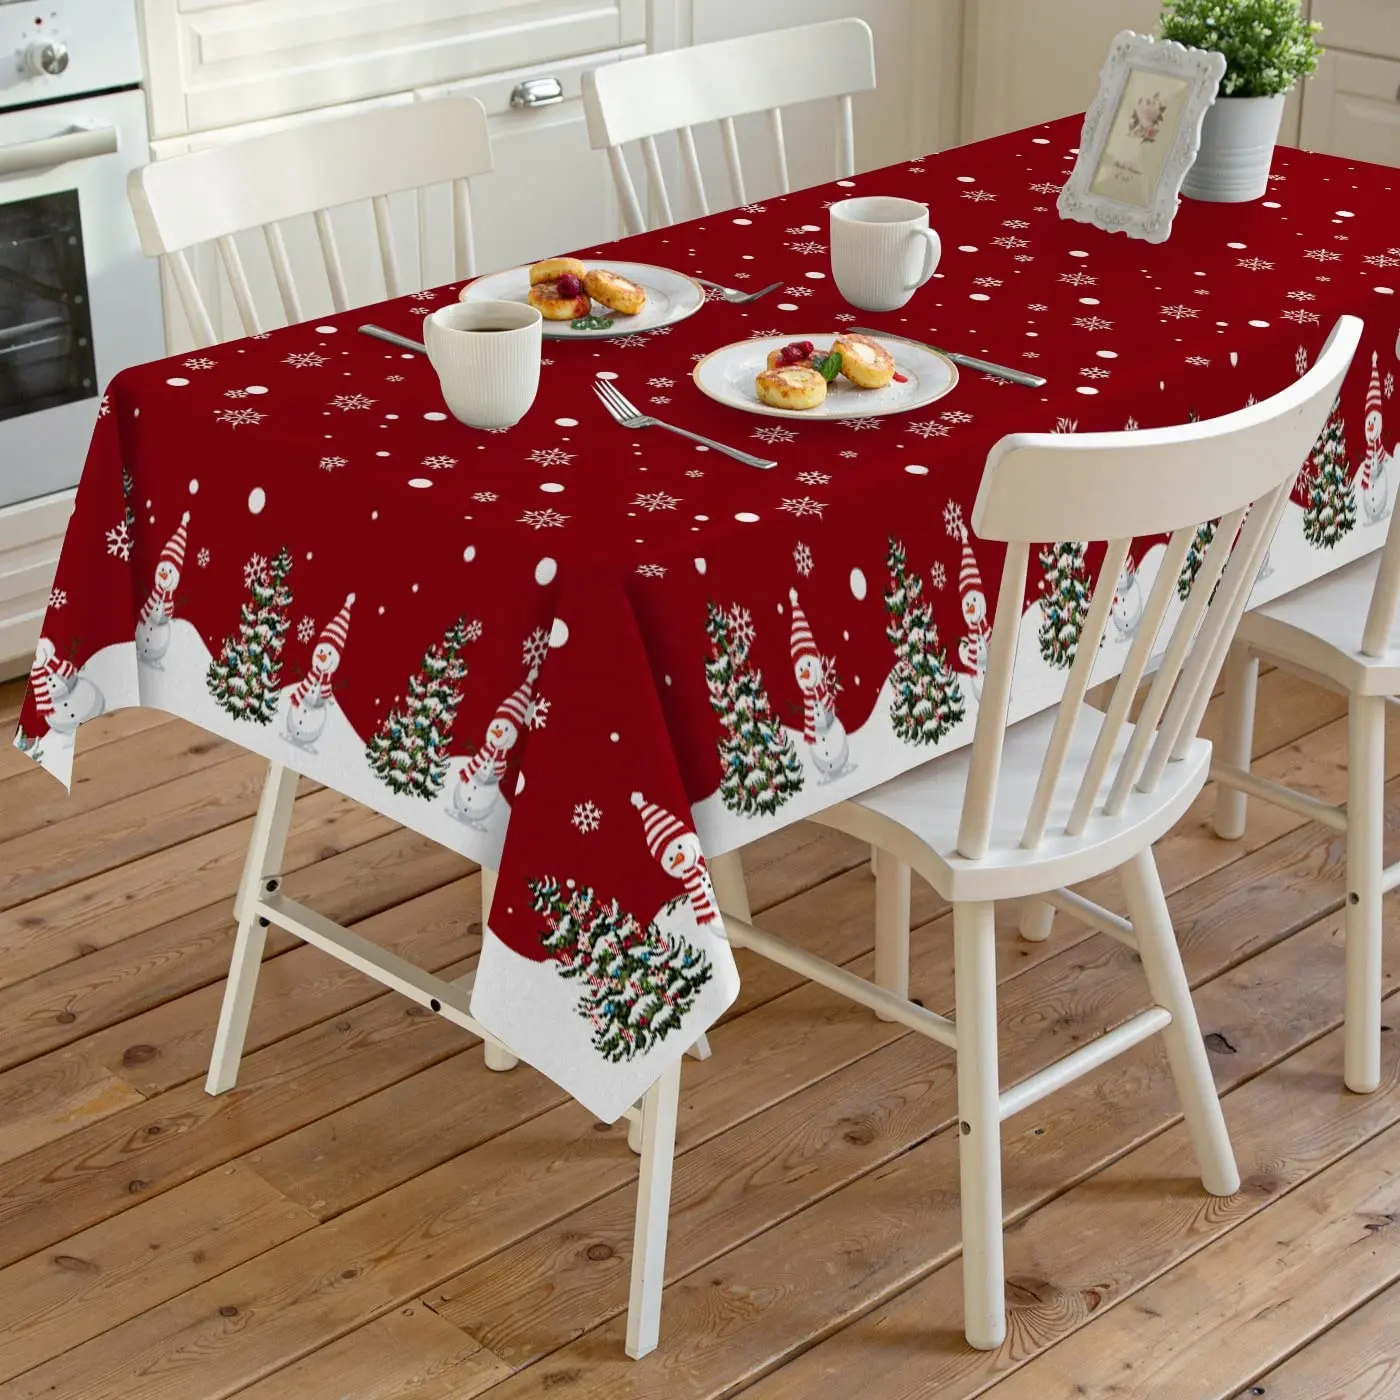 Home Fashions Holiday New Year Fabric Tablecloth Christmas Dinner Table cloth Daily Use Linen Table Covers for Party Events